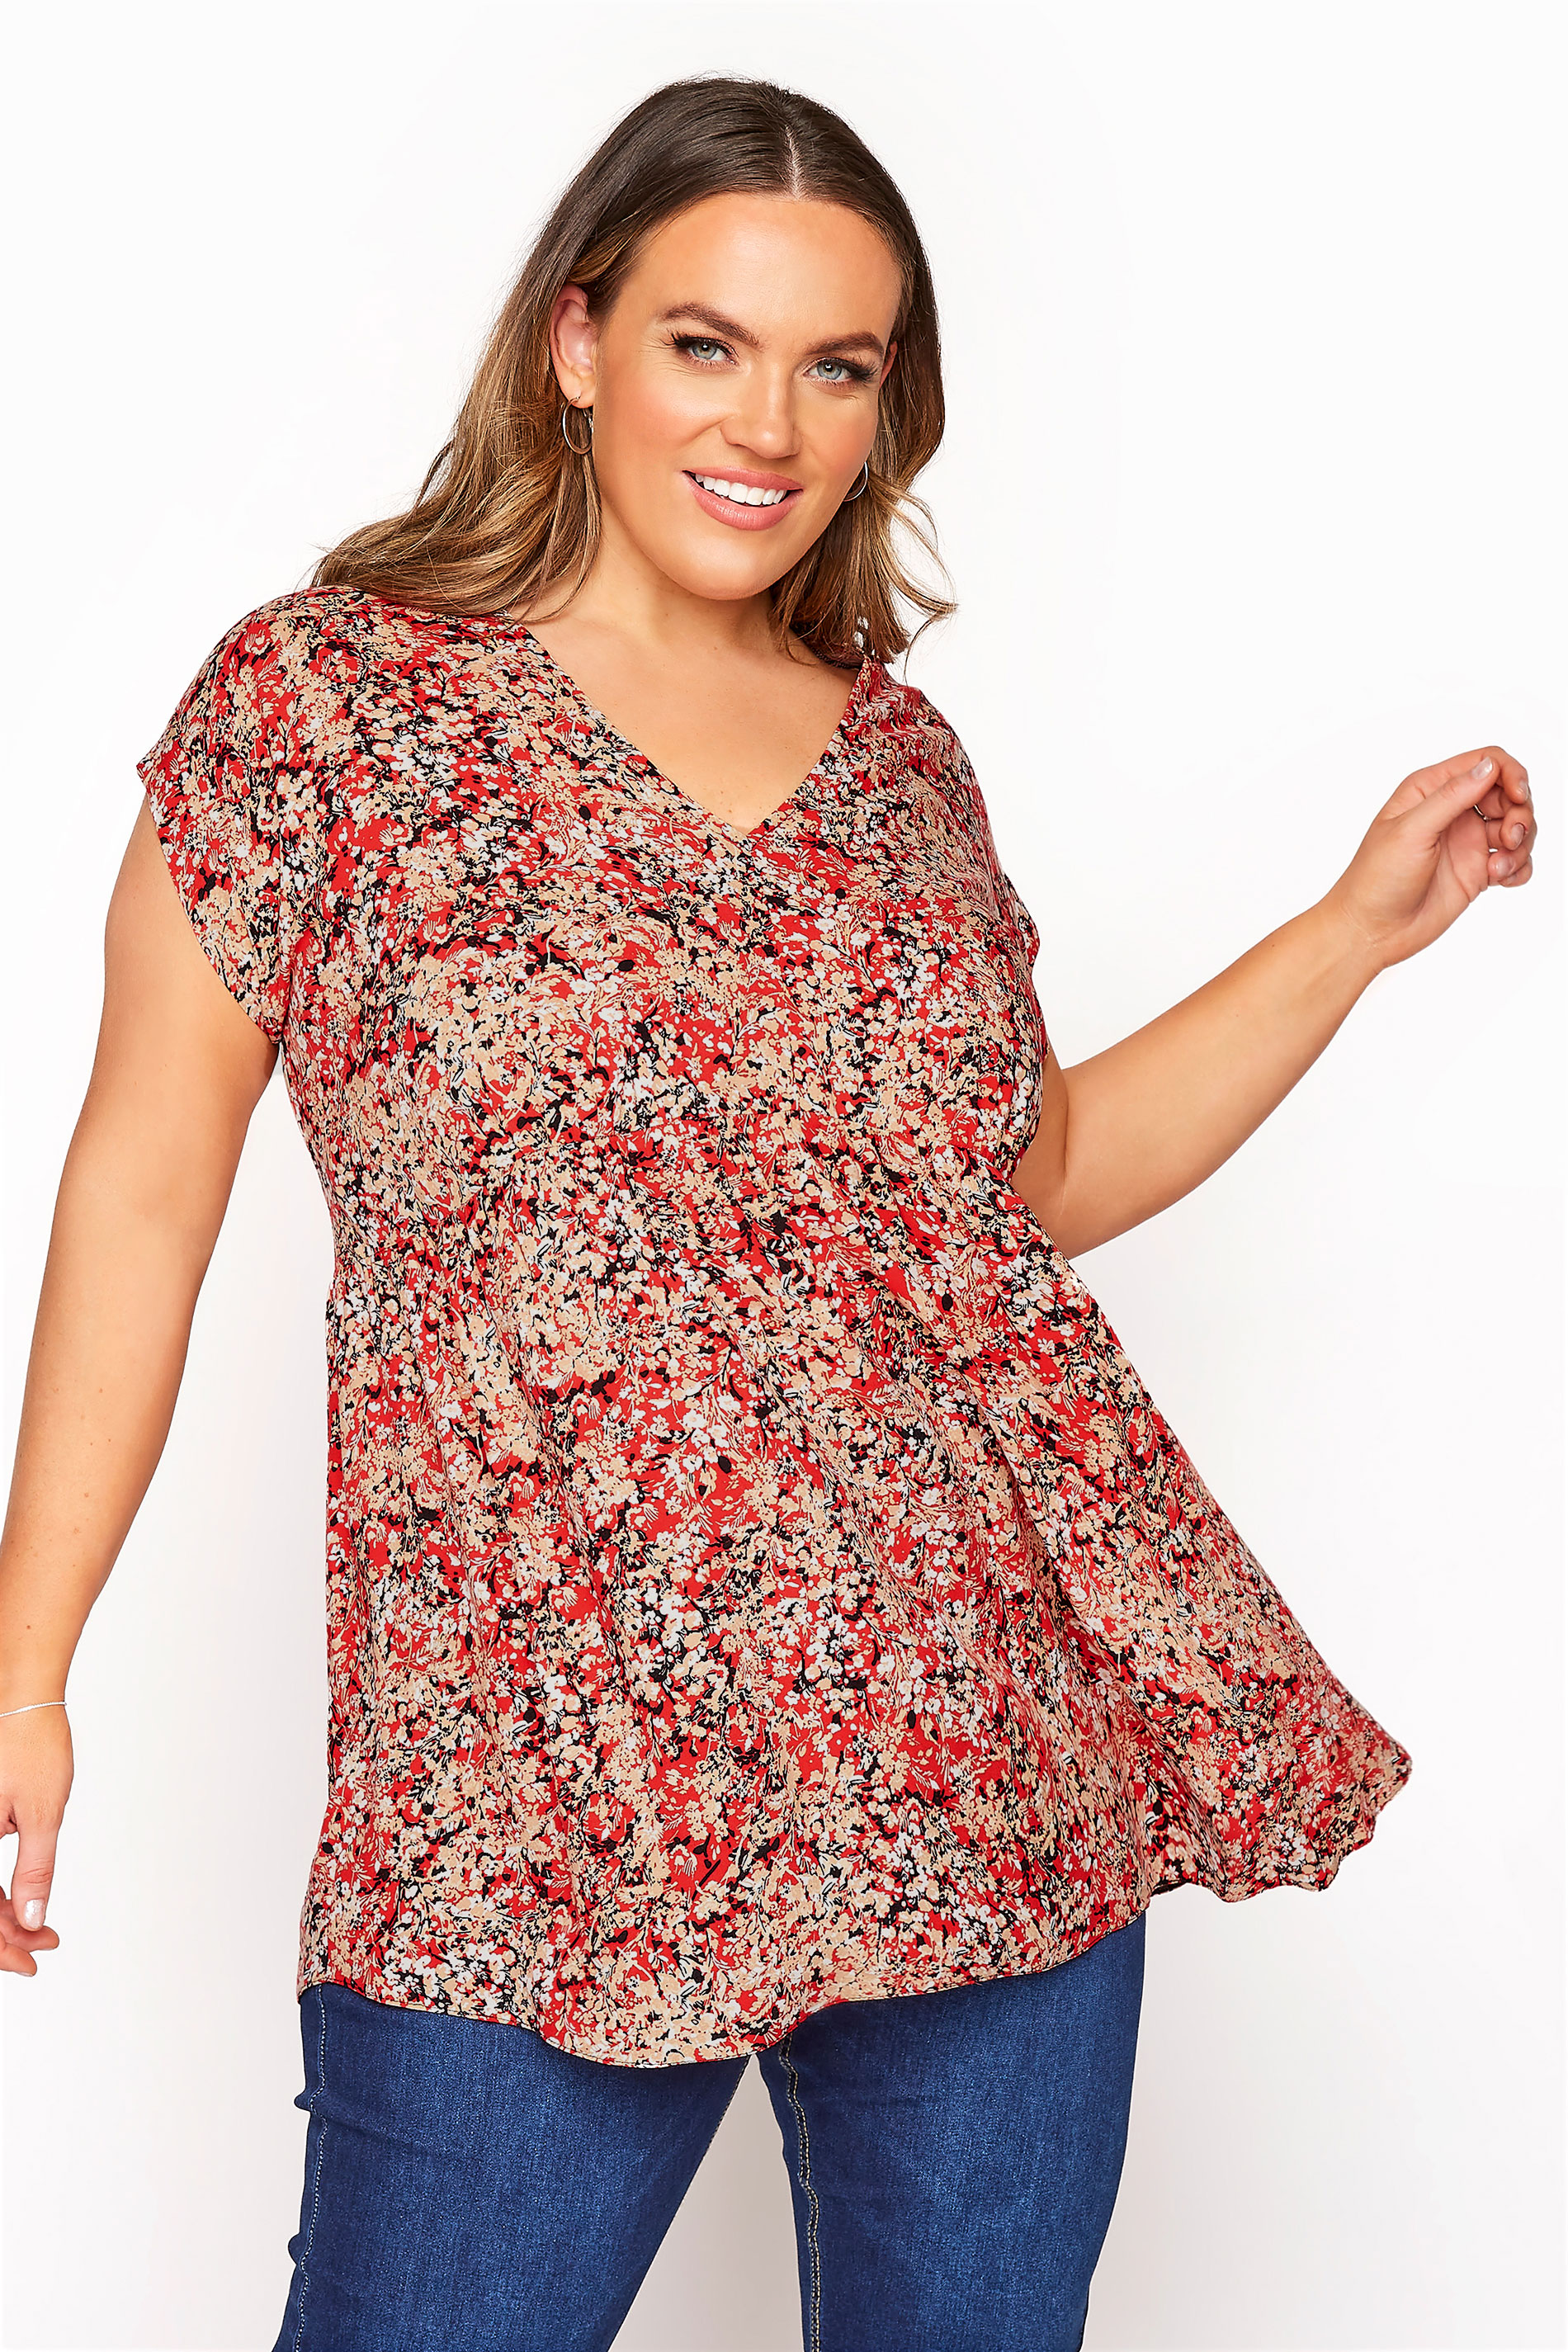 YOURS LONDON Red Ditsy Floral Top_A.jpg